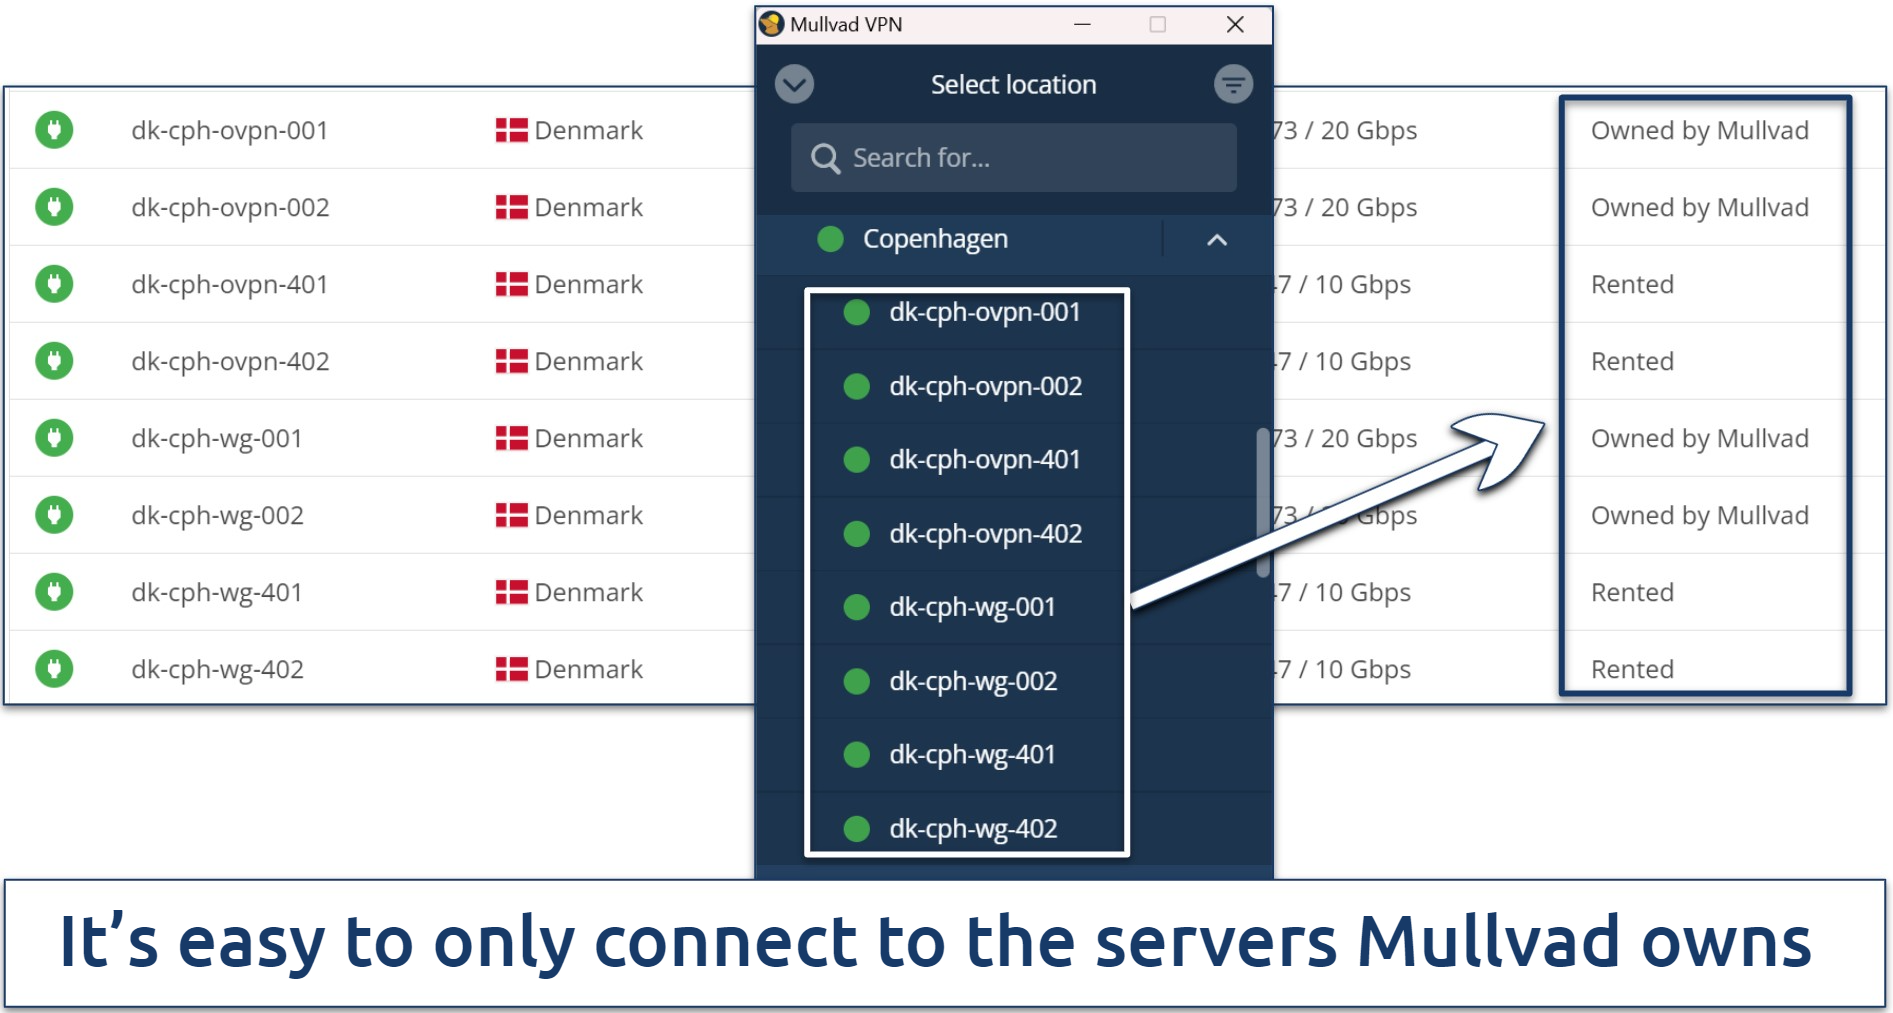 Screenshot of Mullvad's server list in the app and a server list from its website showing which servers are rented